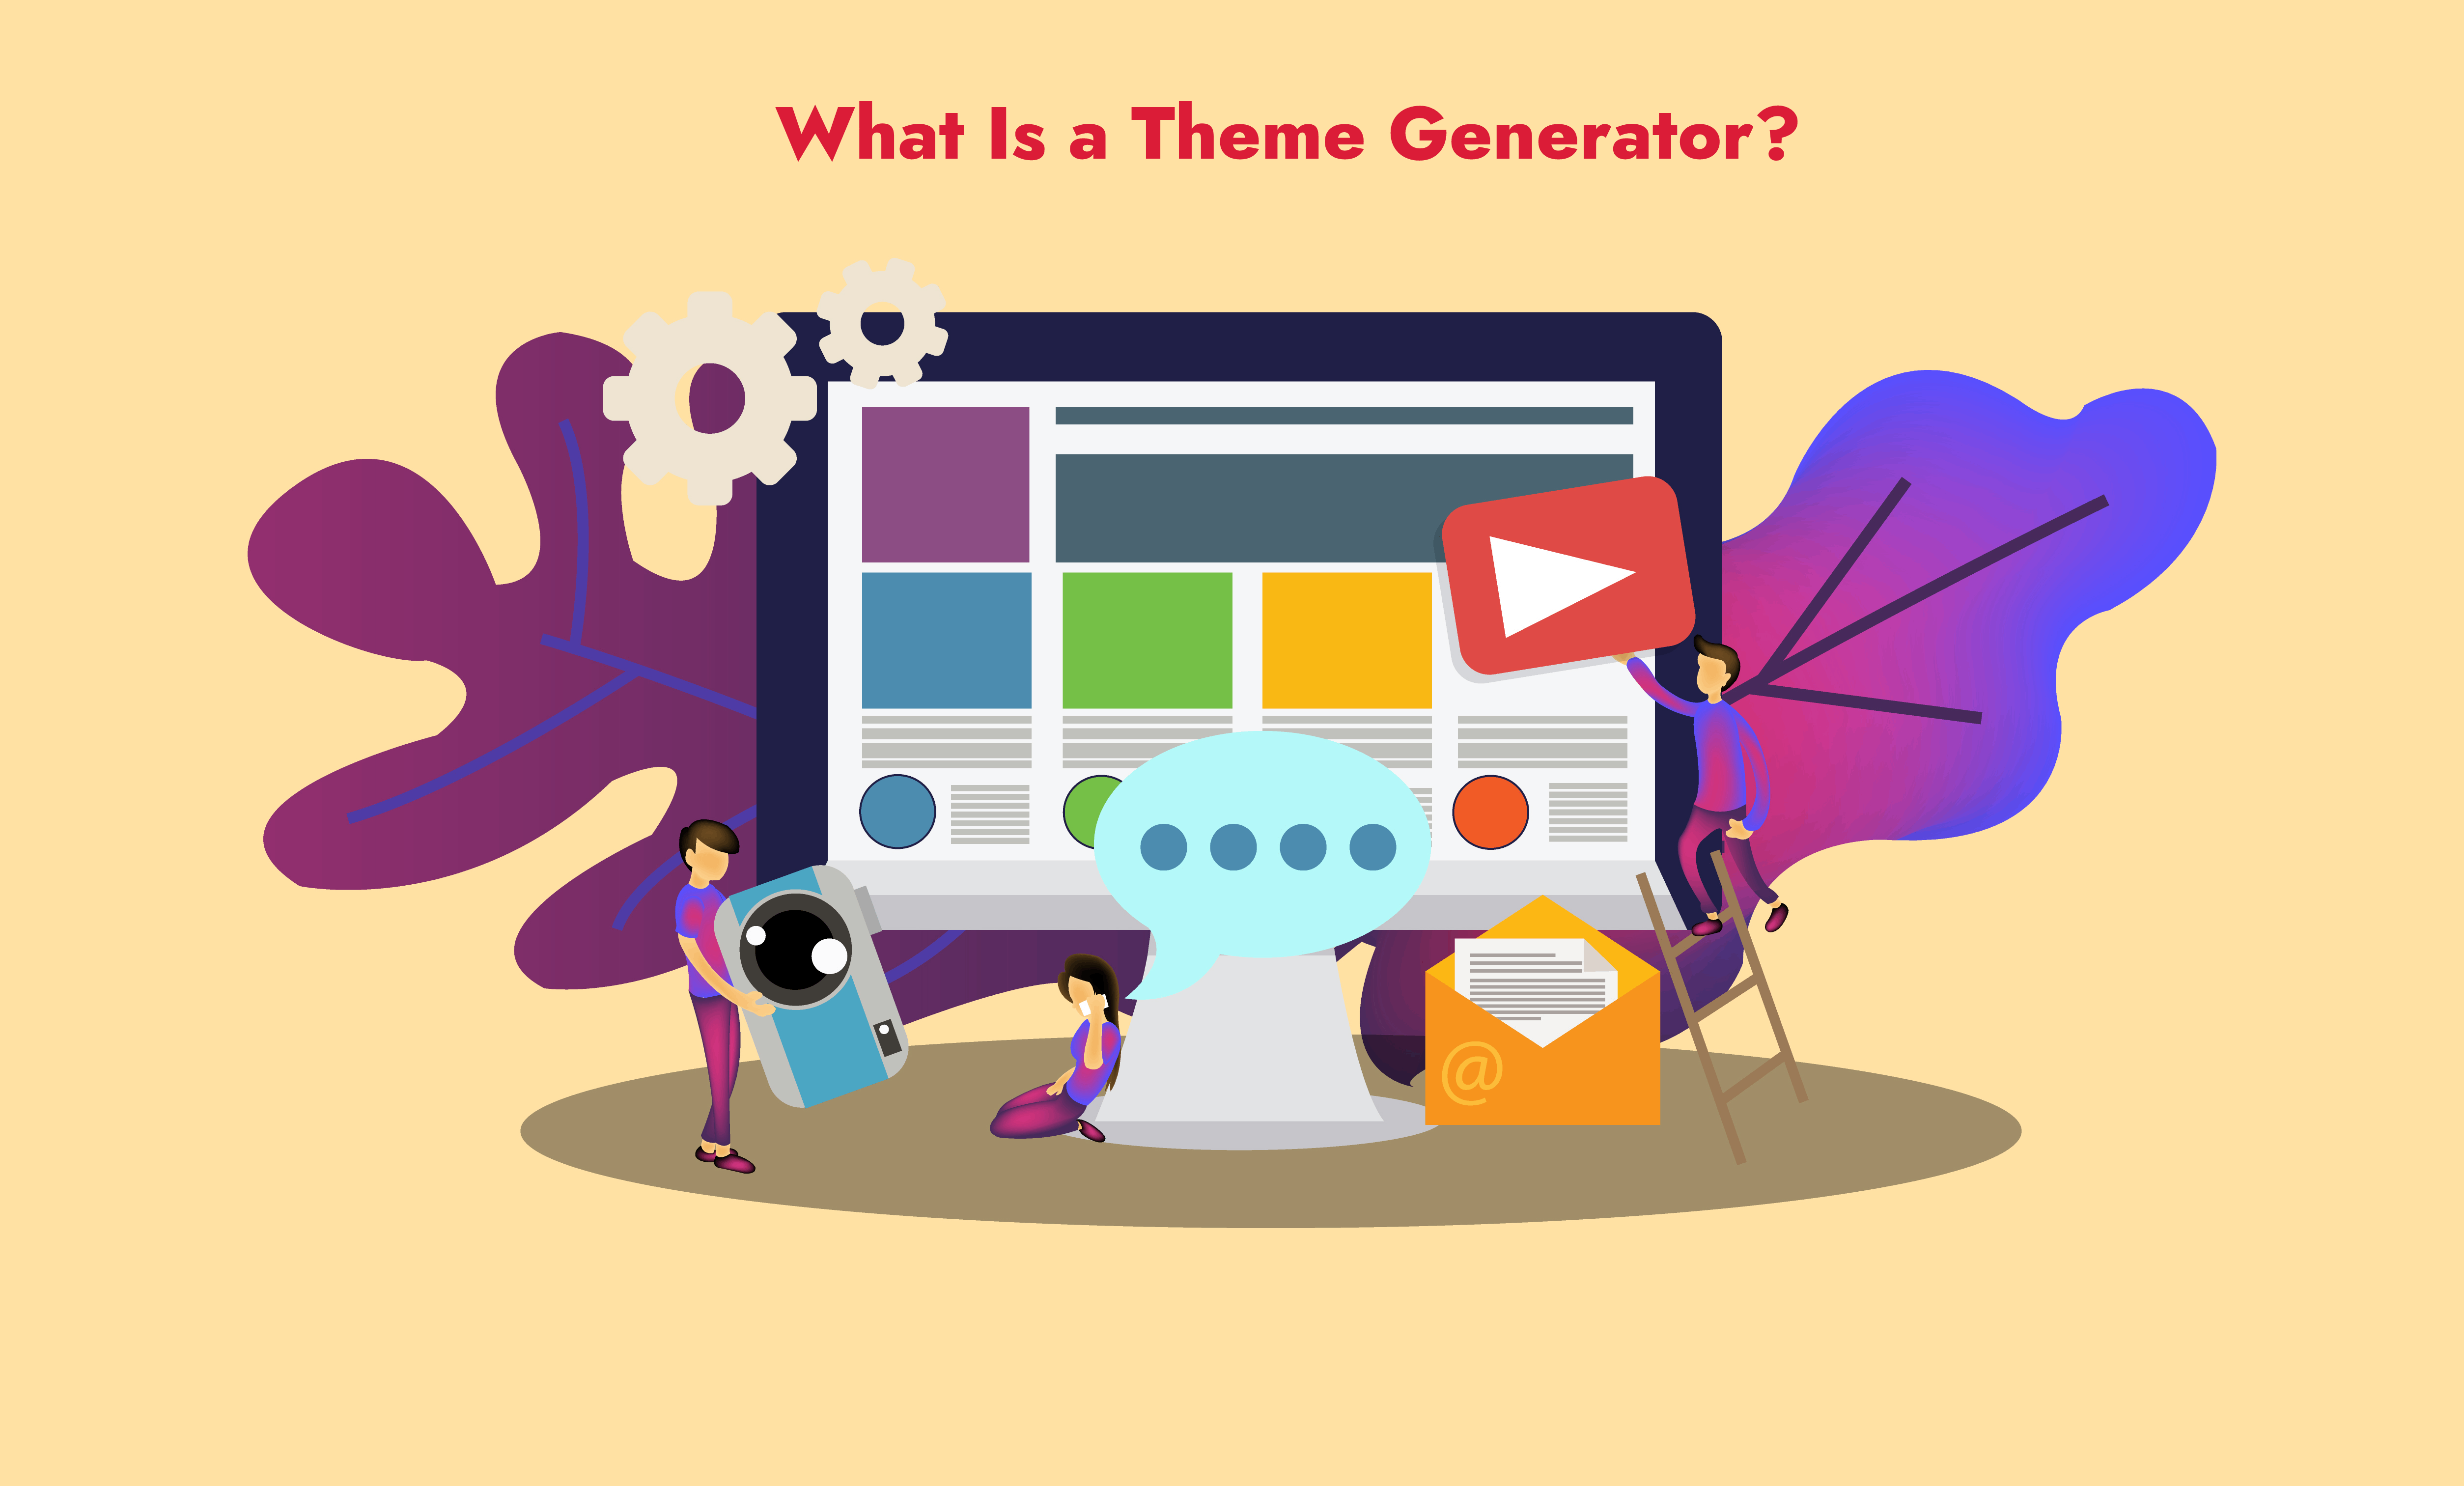 What Is a Theme Generator?